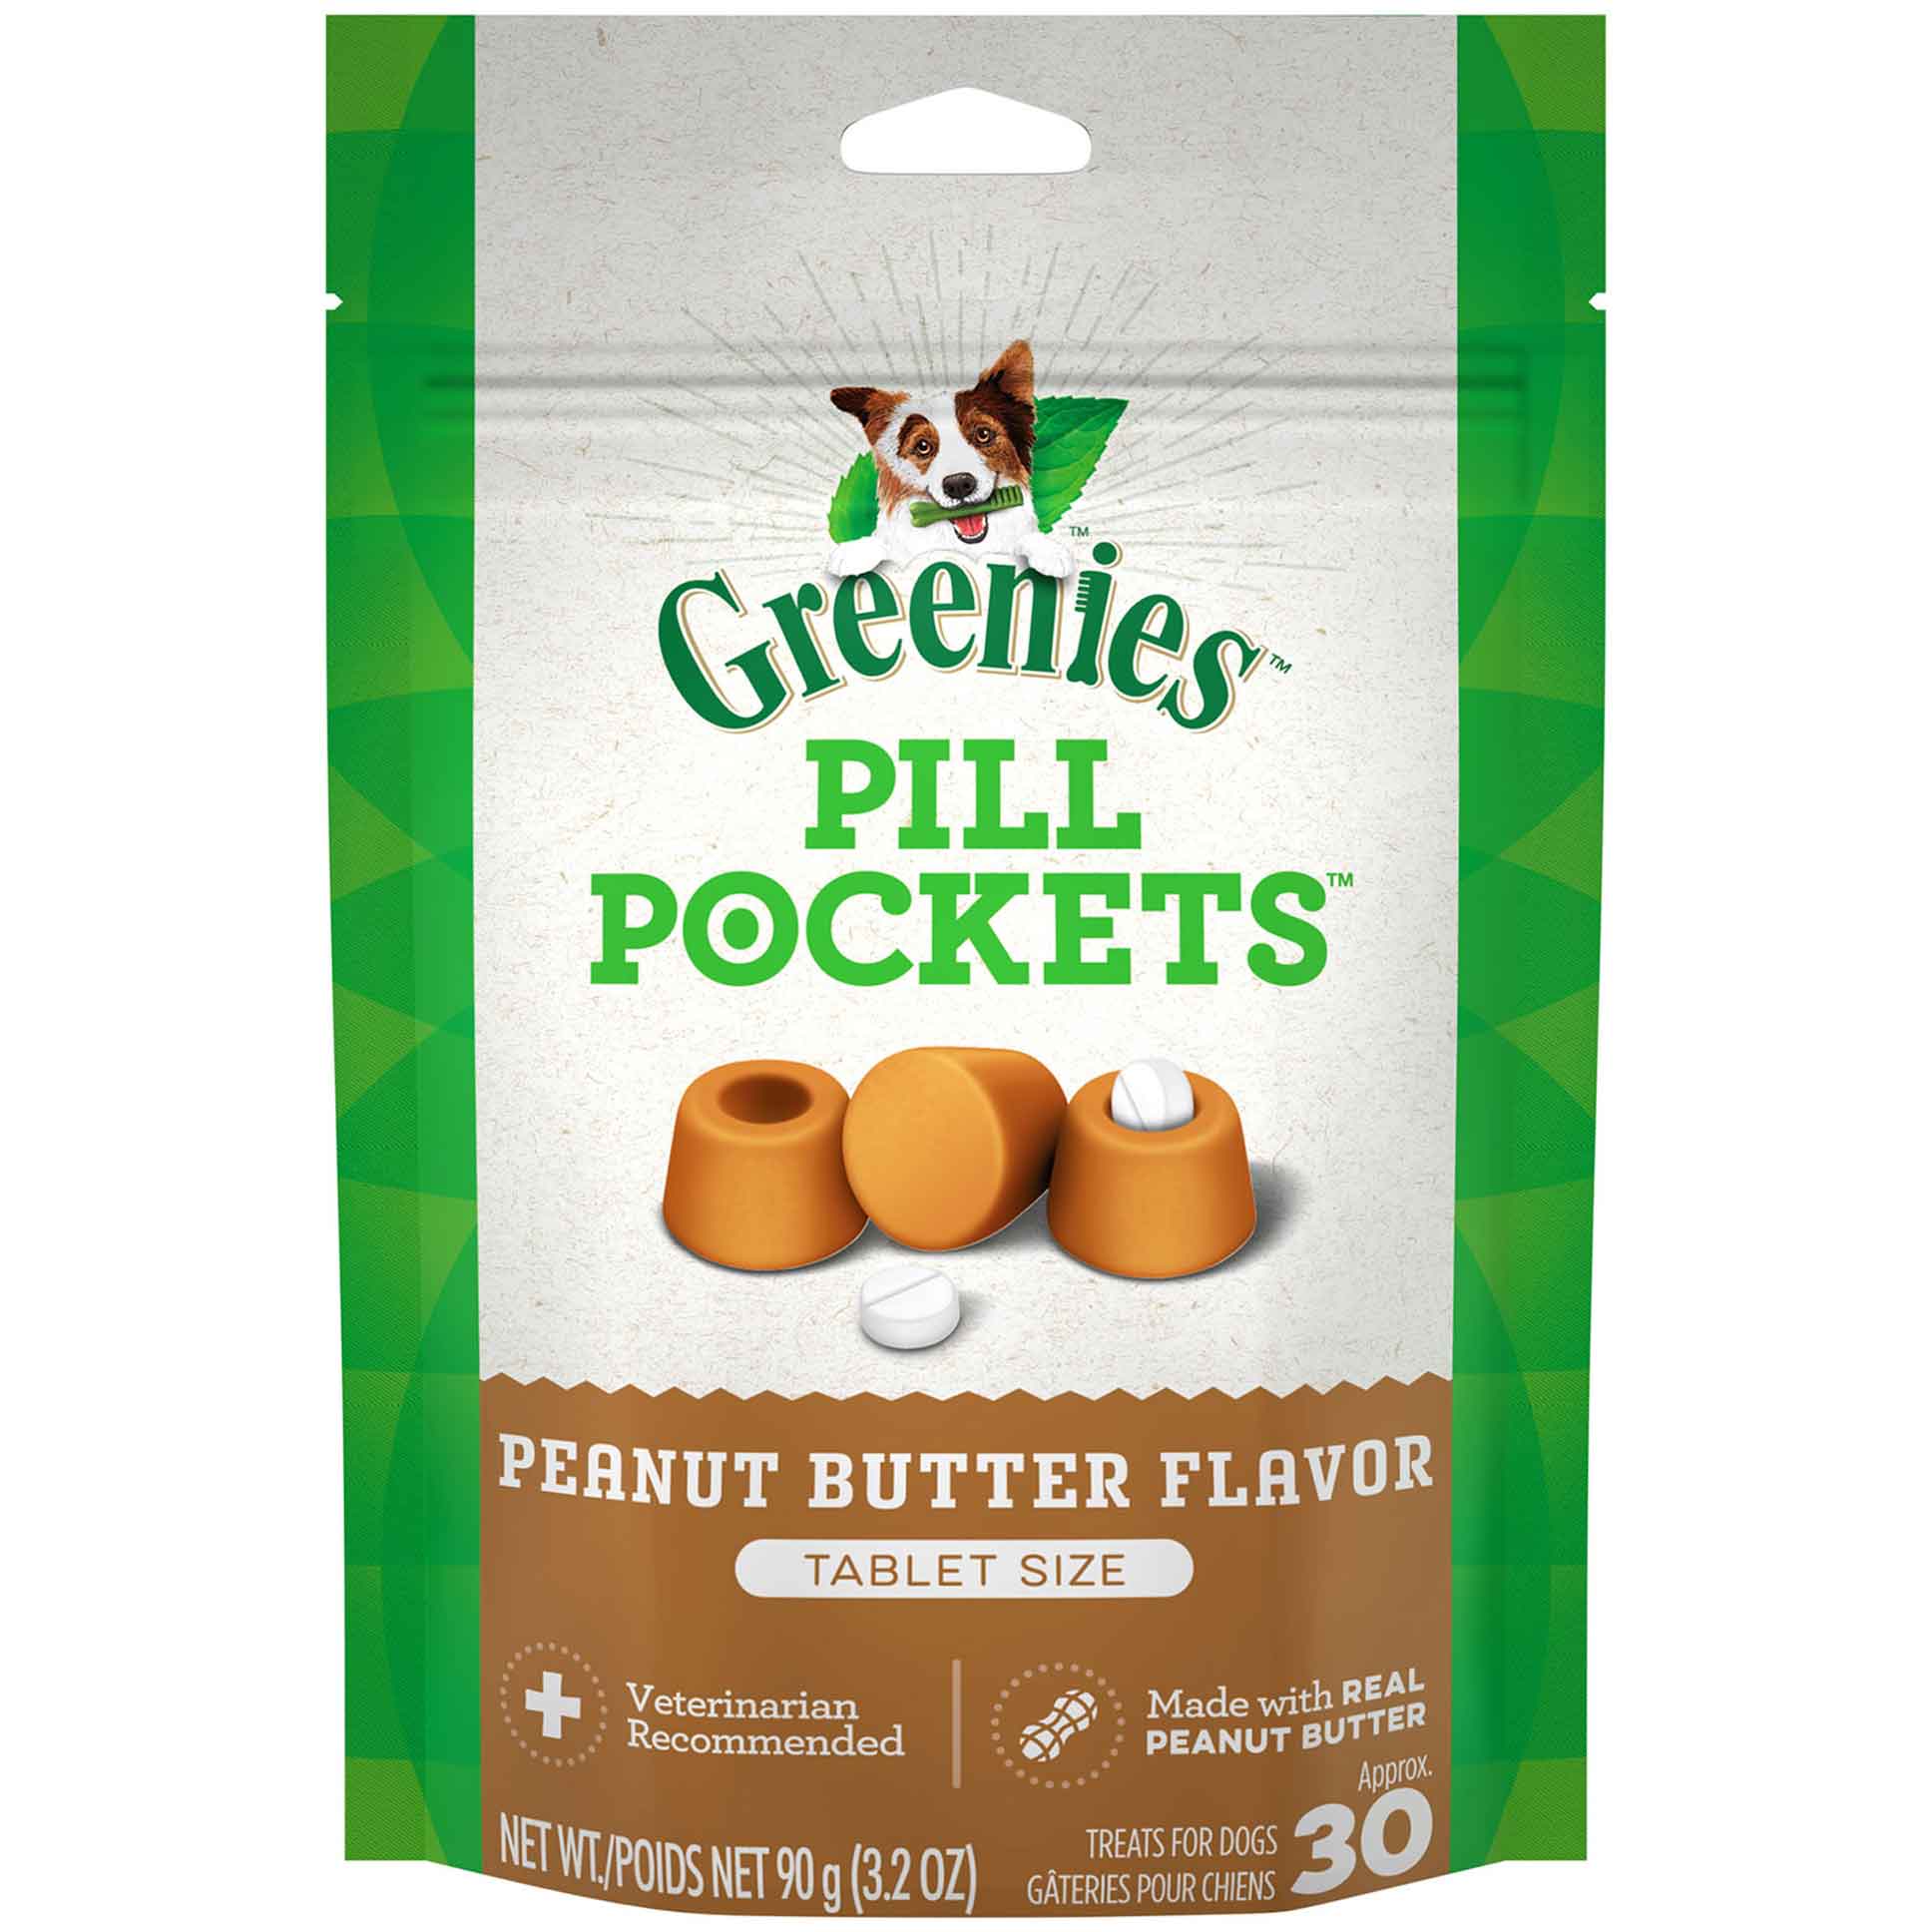 GREENIES PILL POCKETS for Dogs Tablet Size Natural Soft Dog Treats with Real Peanut Butter, 3.2 Ounce Pack (30 Treats)